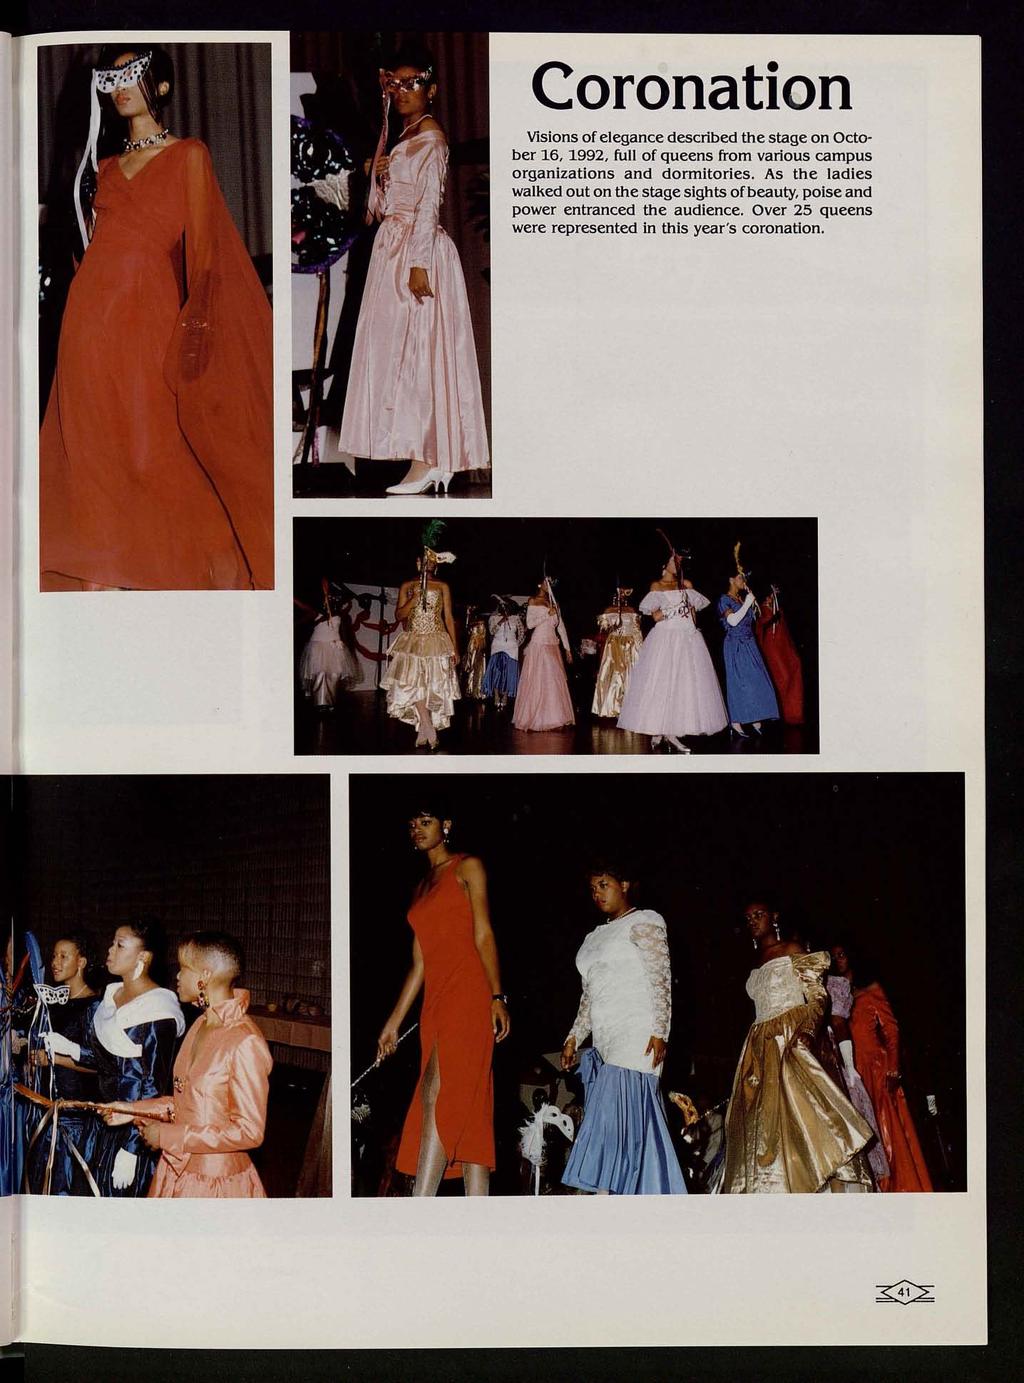 Coronation Visions of elegance described the stage on October 16, 1992, full of queens from various campus organizations and dormitories.